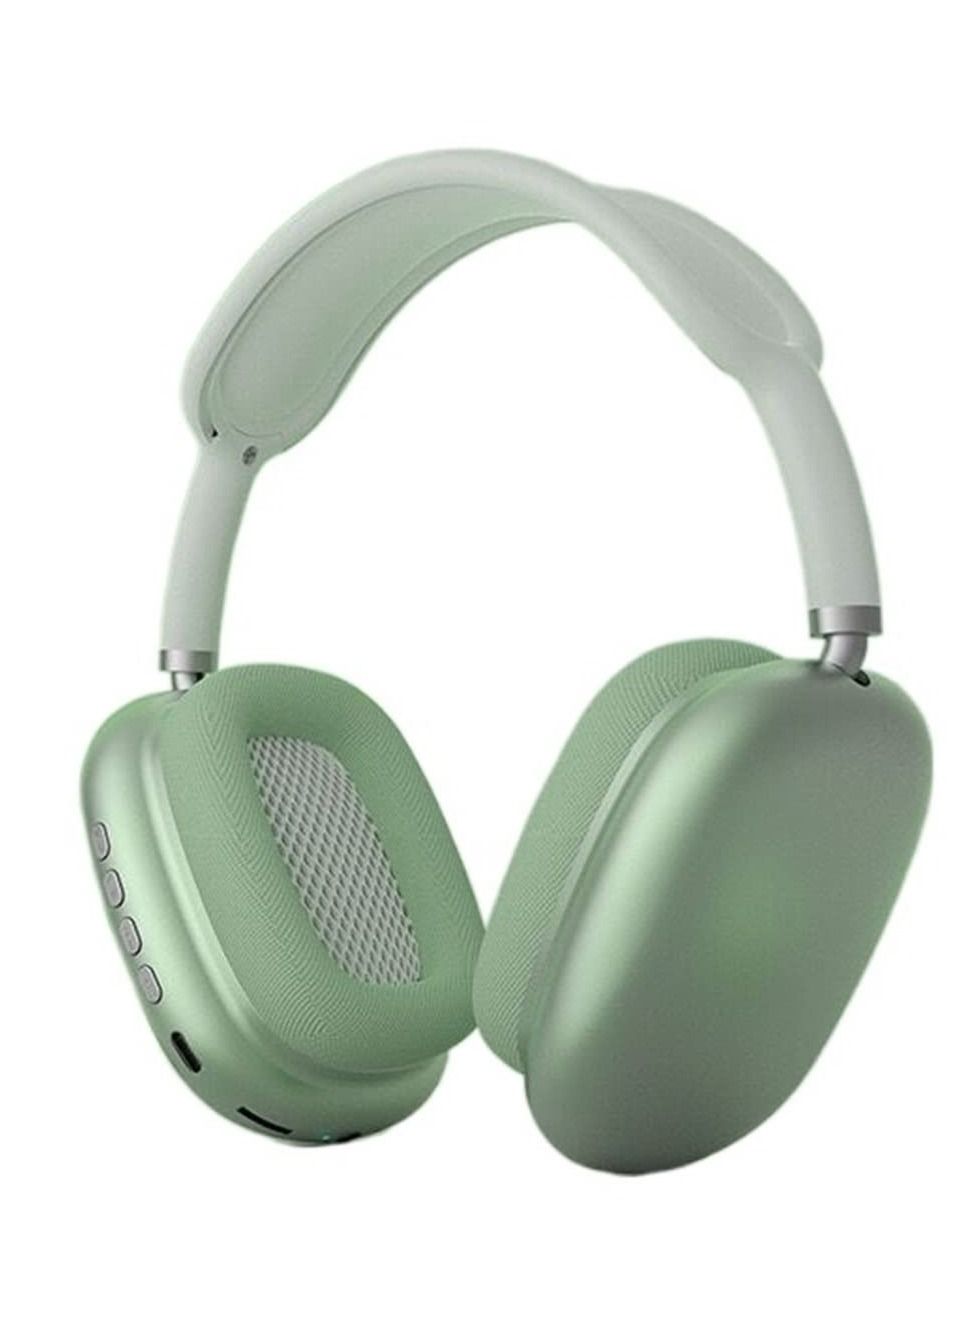 P9 Wireless Headphones with Built-in Microphone - Green